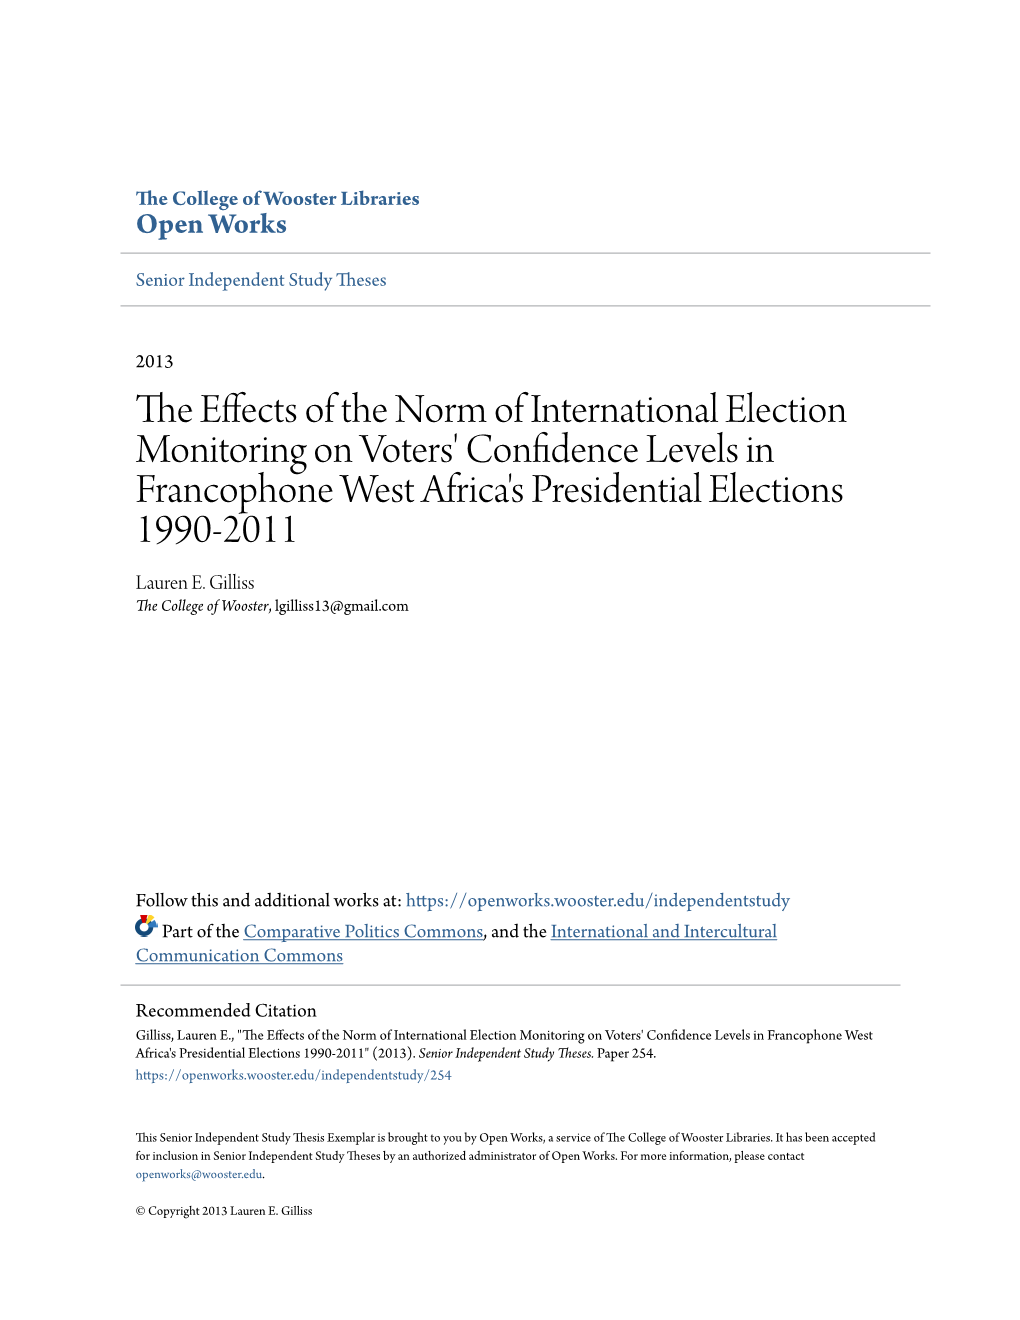 The Effects of the Norm of International Election Monitoring on Voters' Confidence Levels in Francophone West Africa's Presidential Elections 1990-2011" (2013)